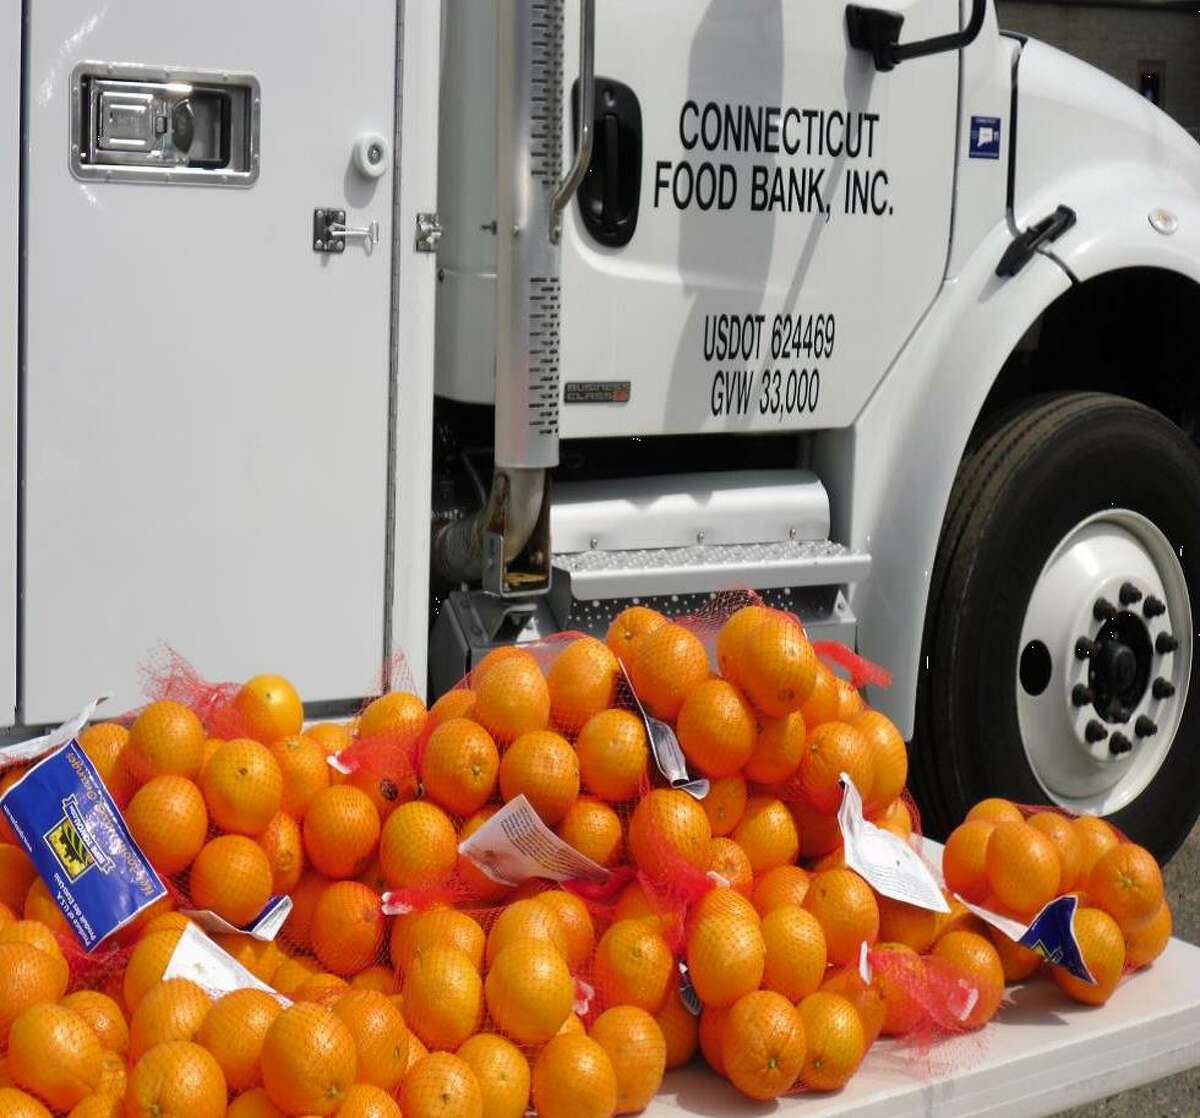 The Stratford Health Department has partnered with Connecticut Food Bank to host a site for their mobile food pantry program pantry once a month in July and August. Photo courtesy of the Stratford Health Department.